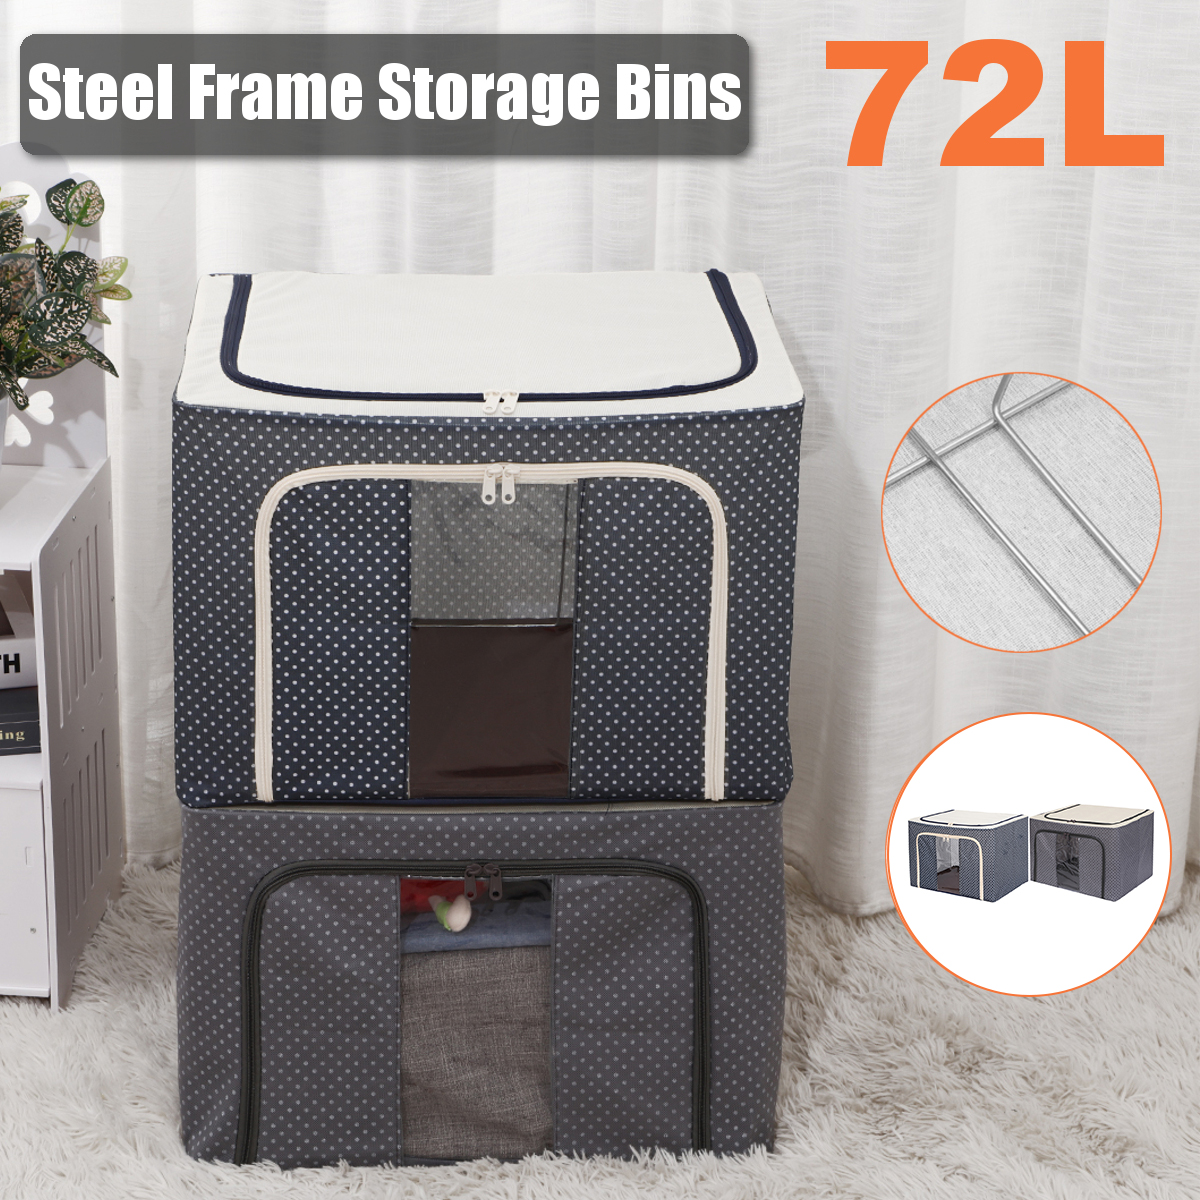 Storage-Bags-72L-Large-Blanket-Clothes-Organization-Containers-Bedding-Comforters-Foldable-Organizer-1914855-1